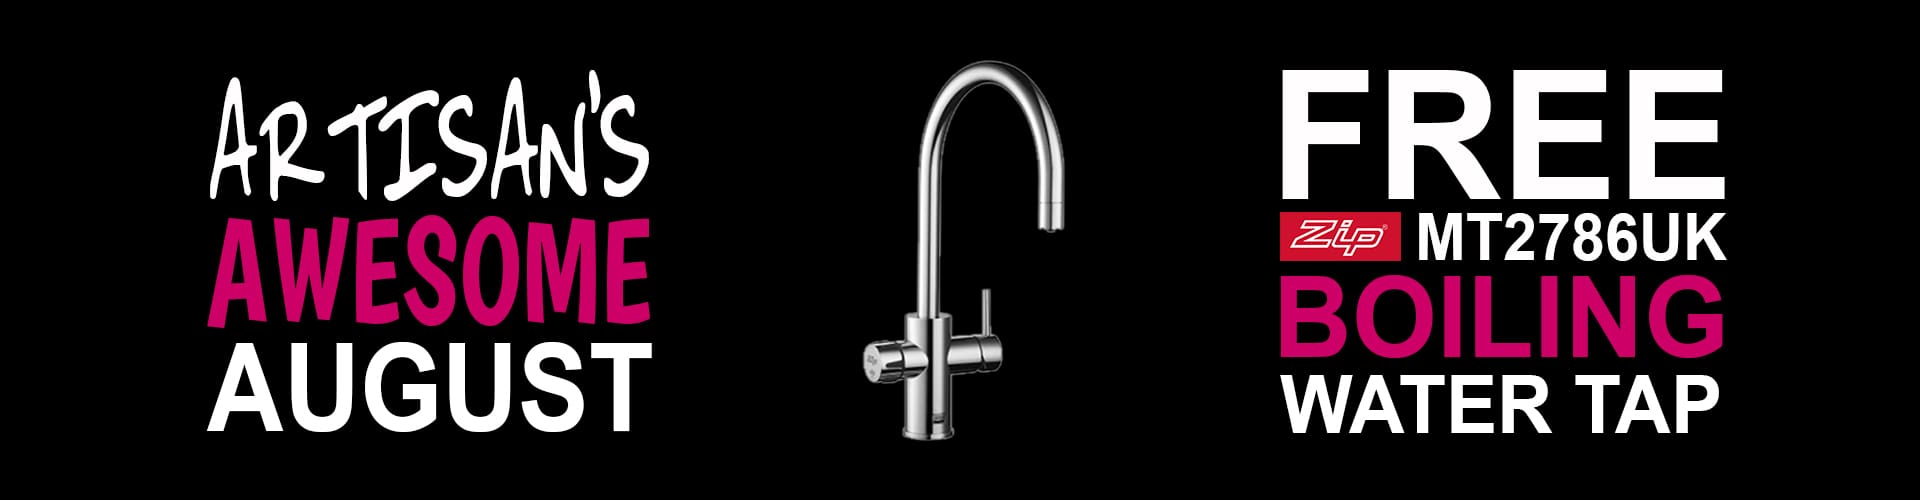 Order your kitchen in August and get a Zip MT2786UK Boiling Water Tap for Free